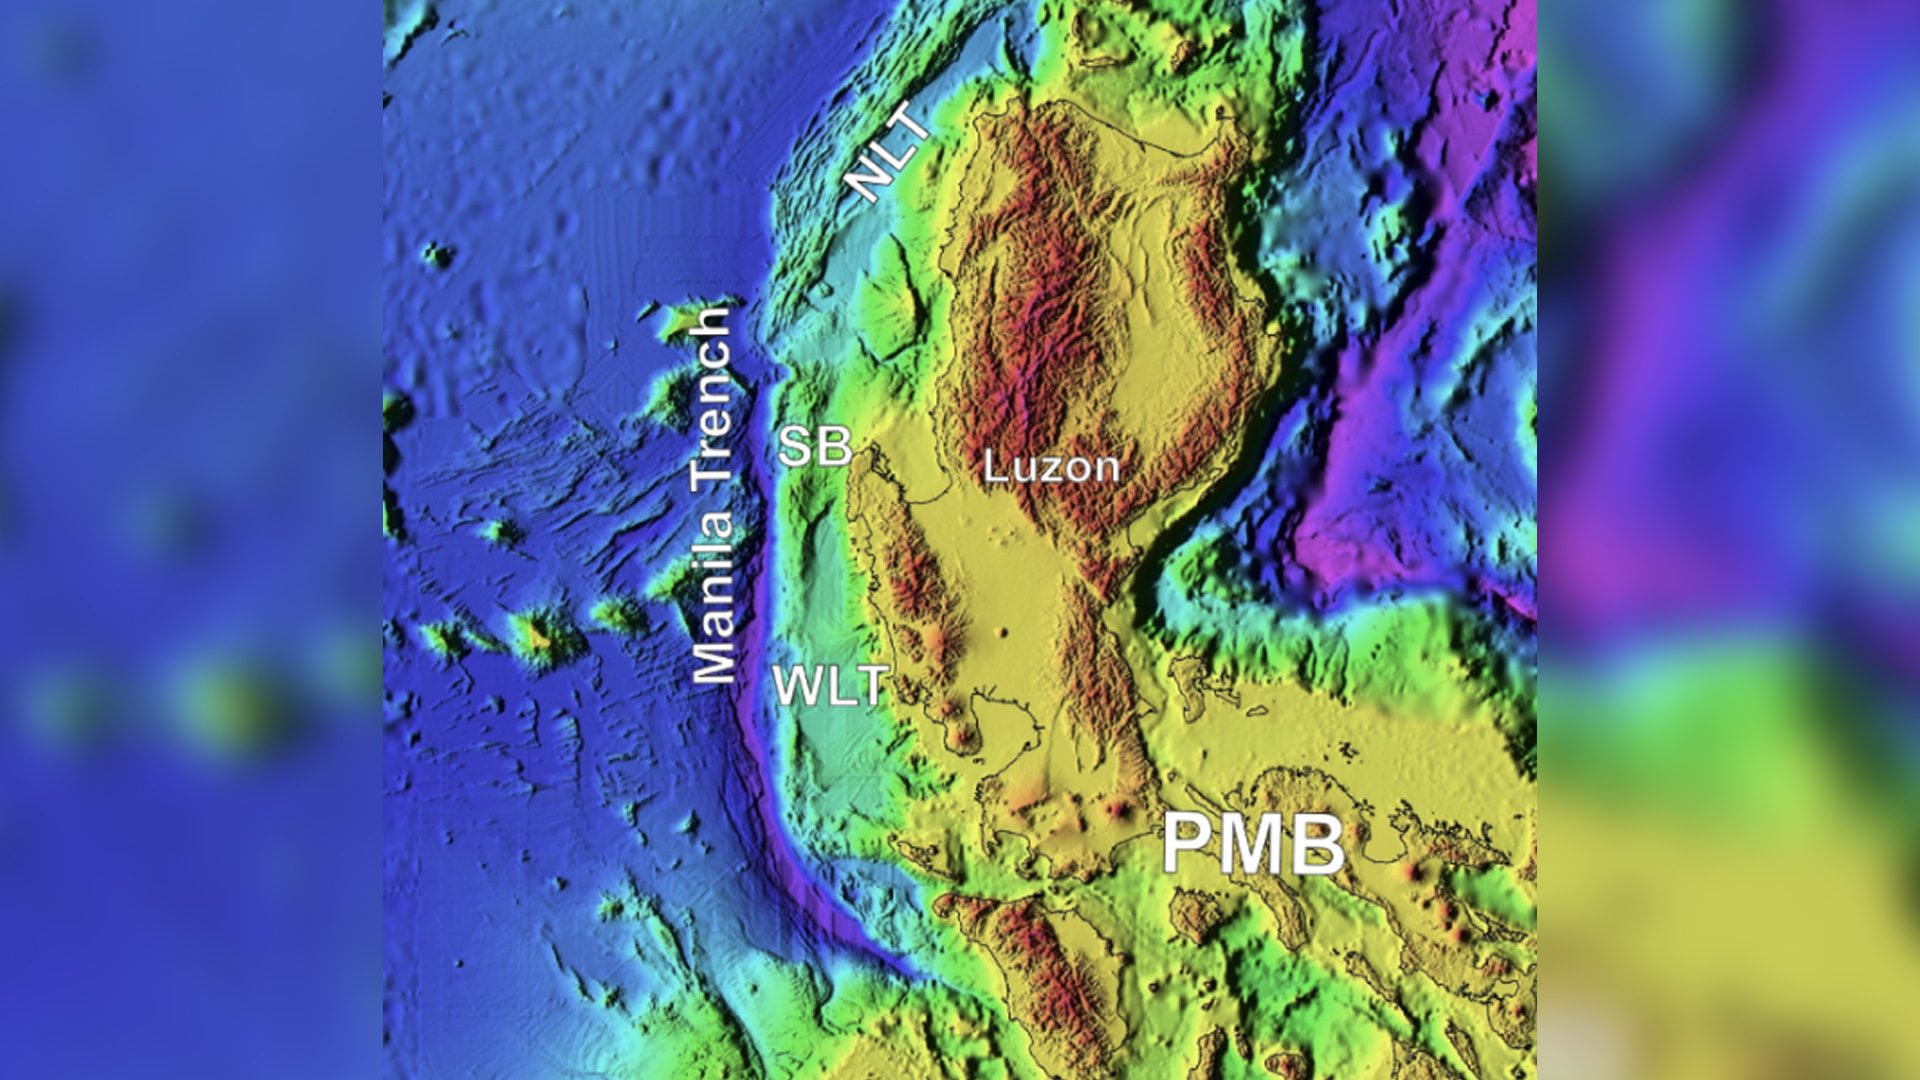 UP scientists locate evidence of gas hydrates in Manila Trench